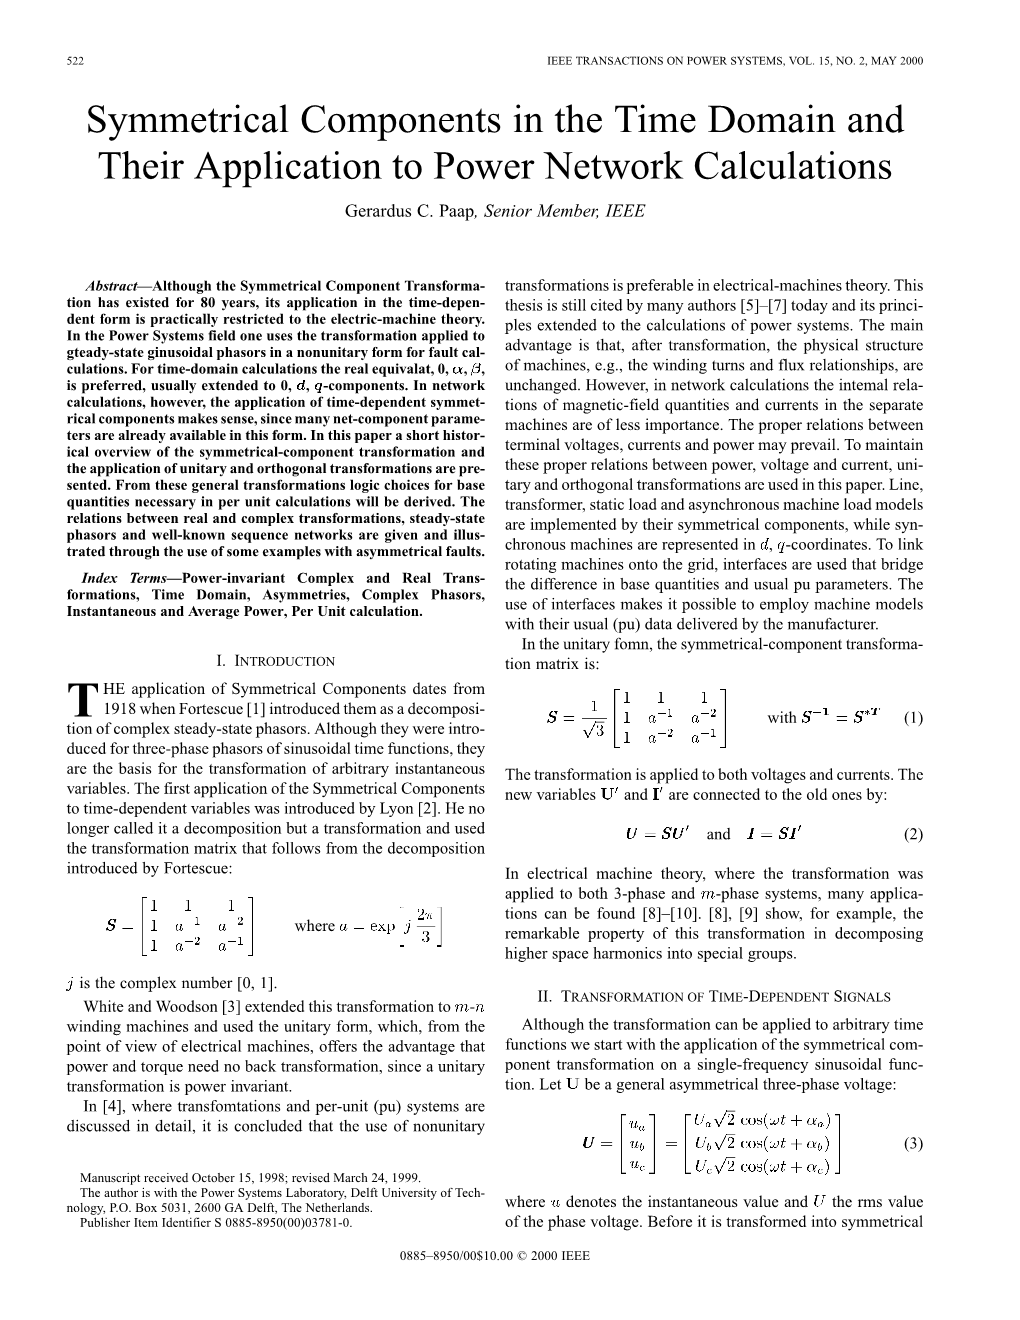 Symmetrical Components in the Time Domain and Their Application to Power Network Calculations Gerardus C